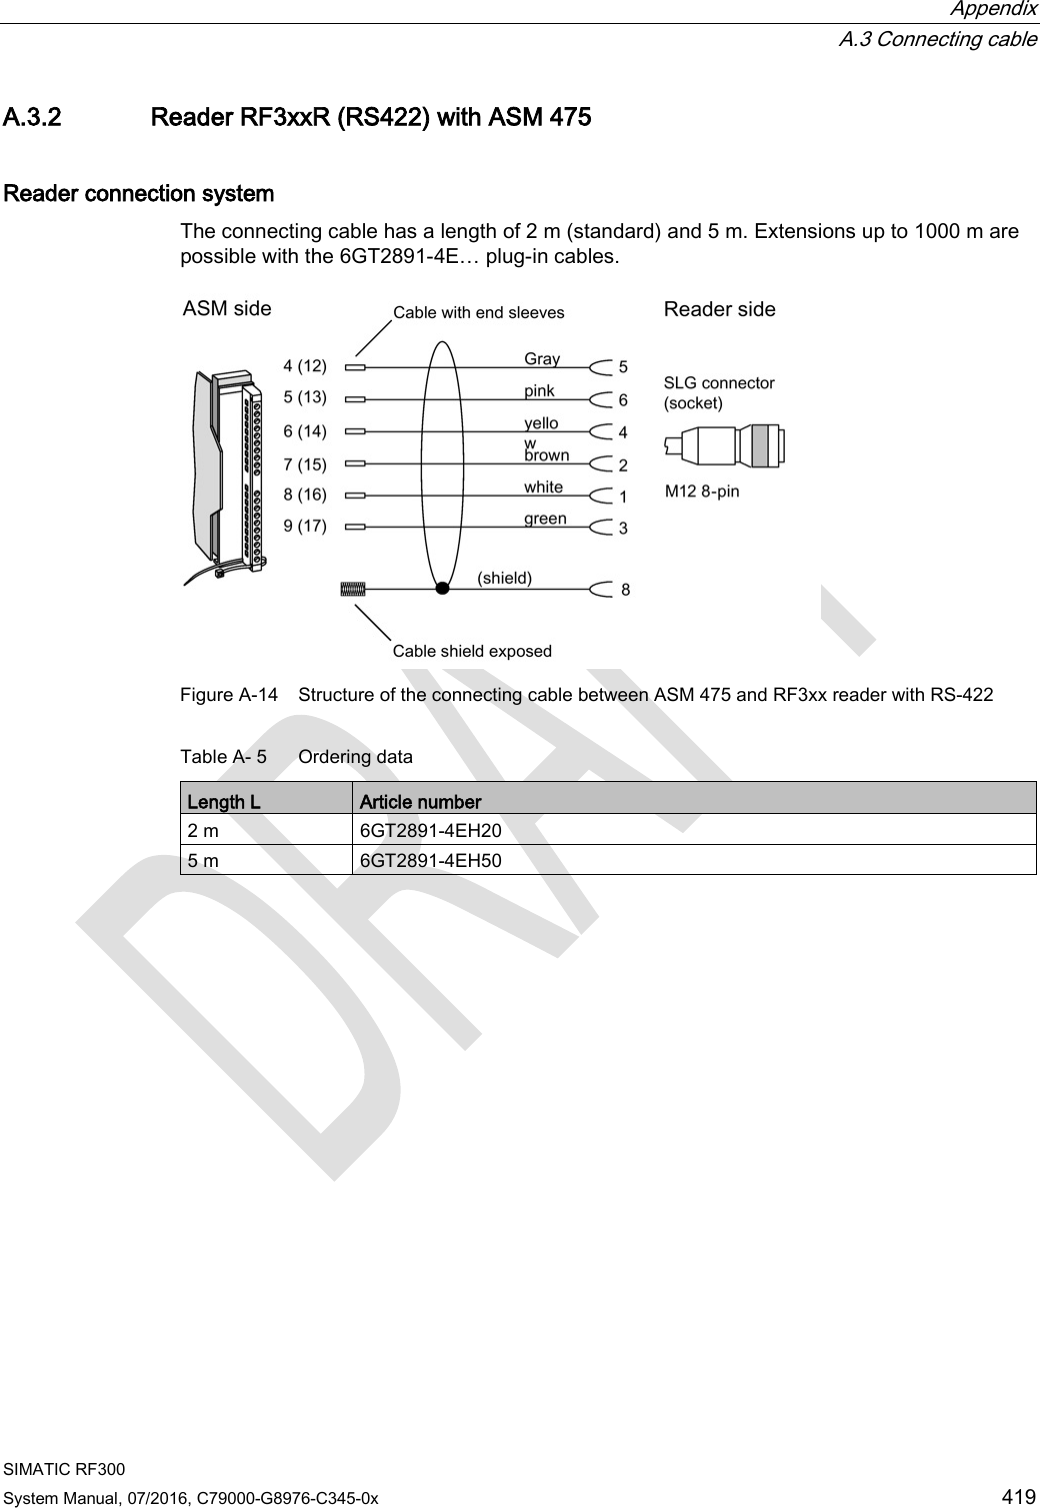  Appendix  A.3 Connecting cable SIMATIC RF300 System Manual, 07/2016, C79000-G8976-C345-0x 419 A.3.2 Reader RF3xxR (RS422) with ASM 475 Reader connection system The connecting cable has a length of 2 m (standard) and 5 m. Extensions up to 1000 m are possible with the 6GT2891-4E… plug-in cables.   Figure A-14 Structure of the connecting cable between ASM 475 and RF3xx reader with RS-422 Table A- 5  Ordering data Length L Article number 2 m 6GT2891-4EH20 5 m 6GT2891-4EH50 